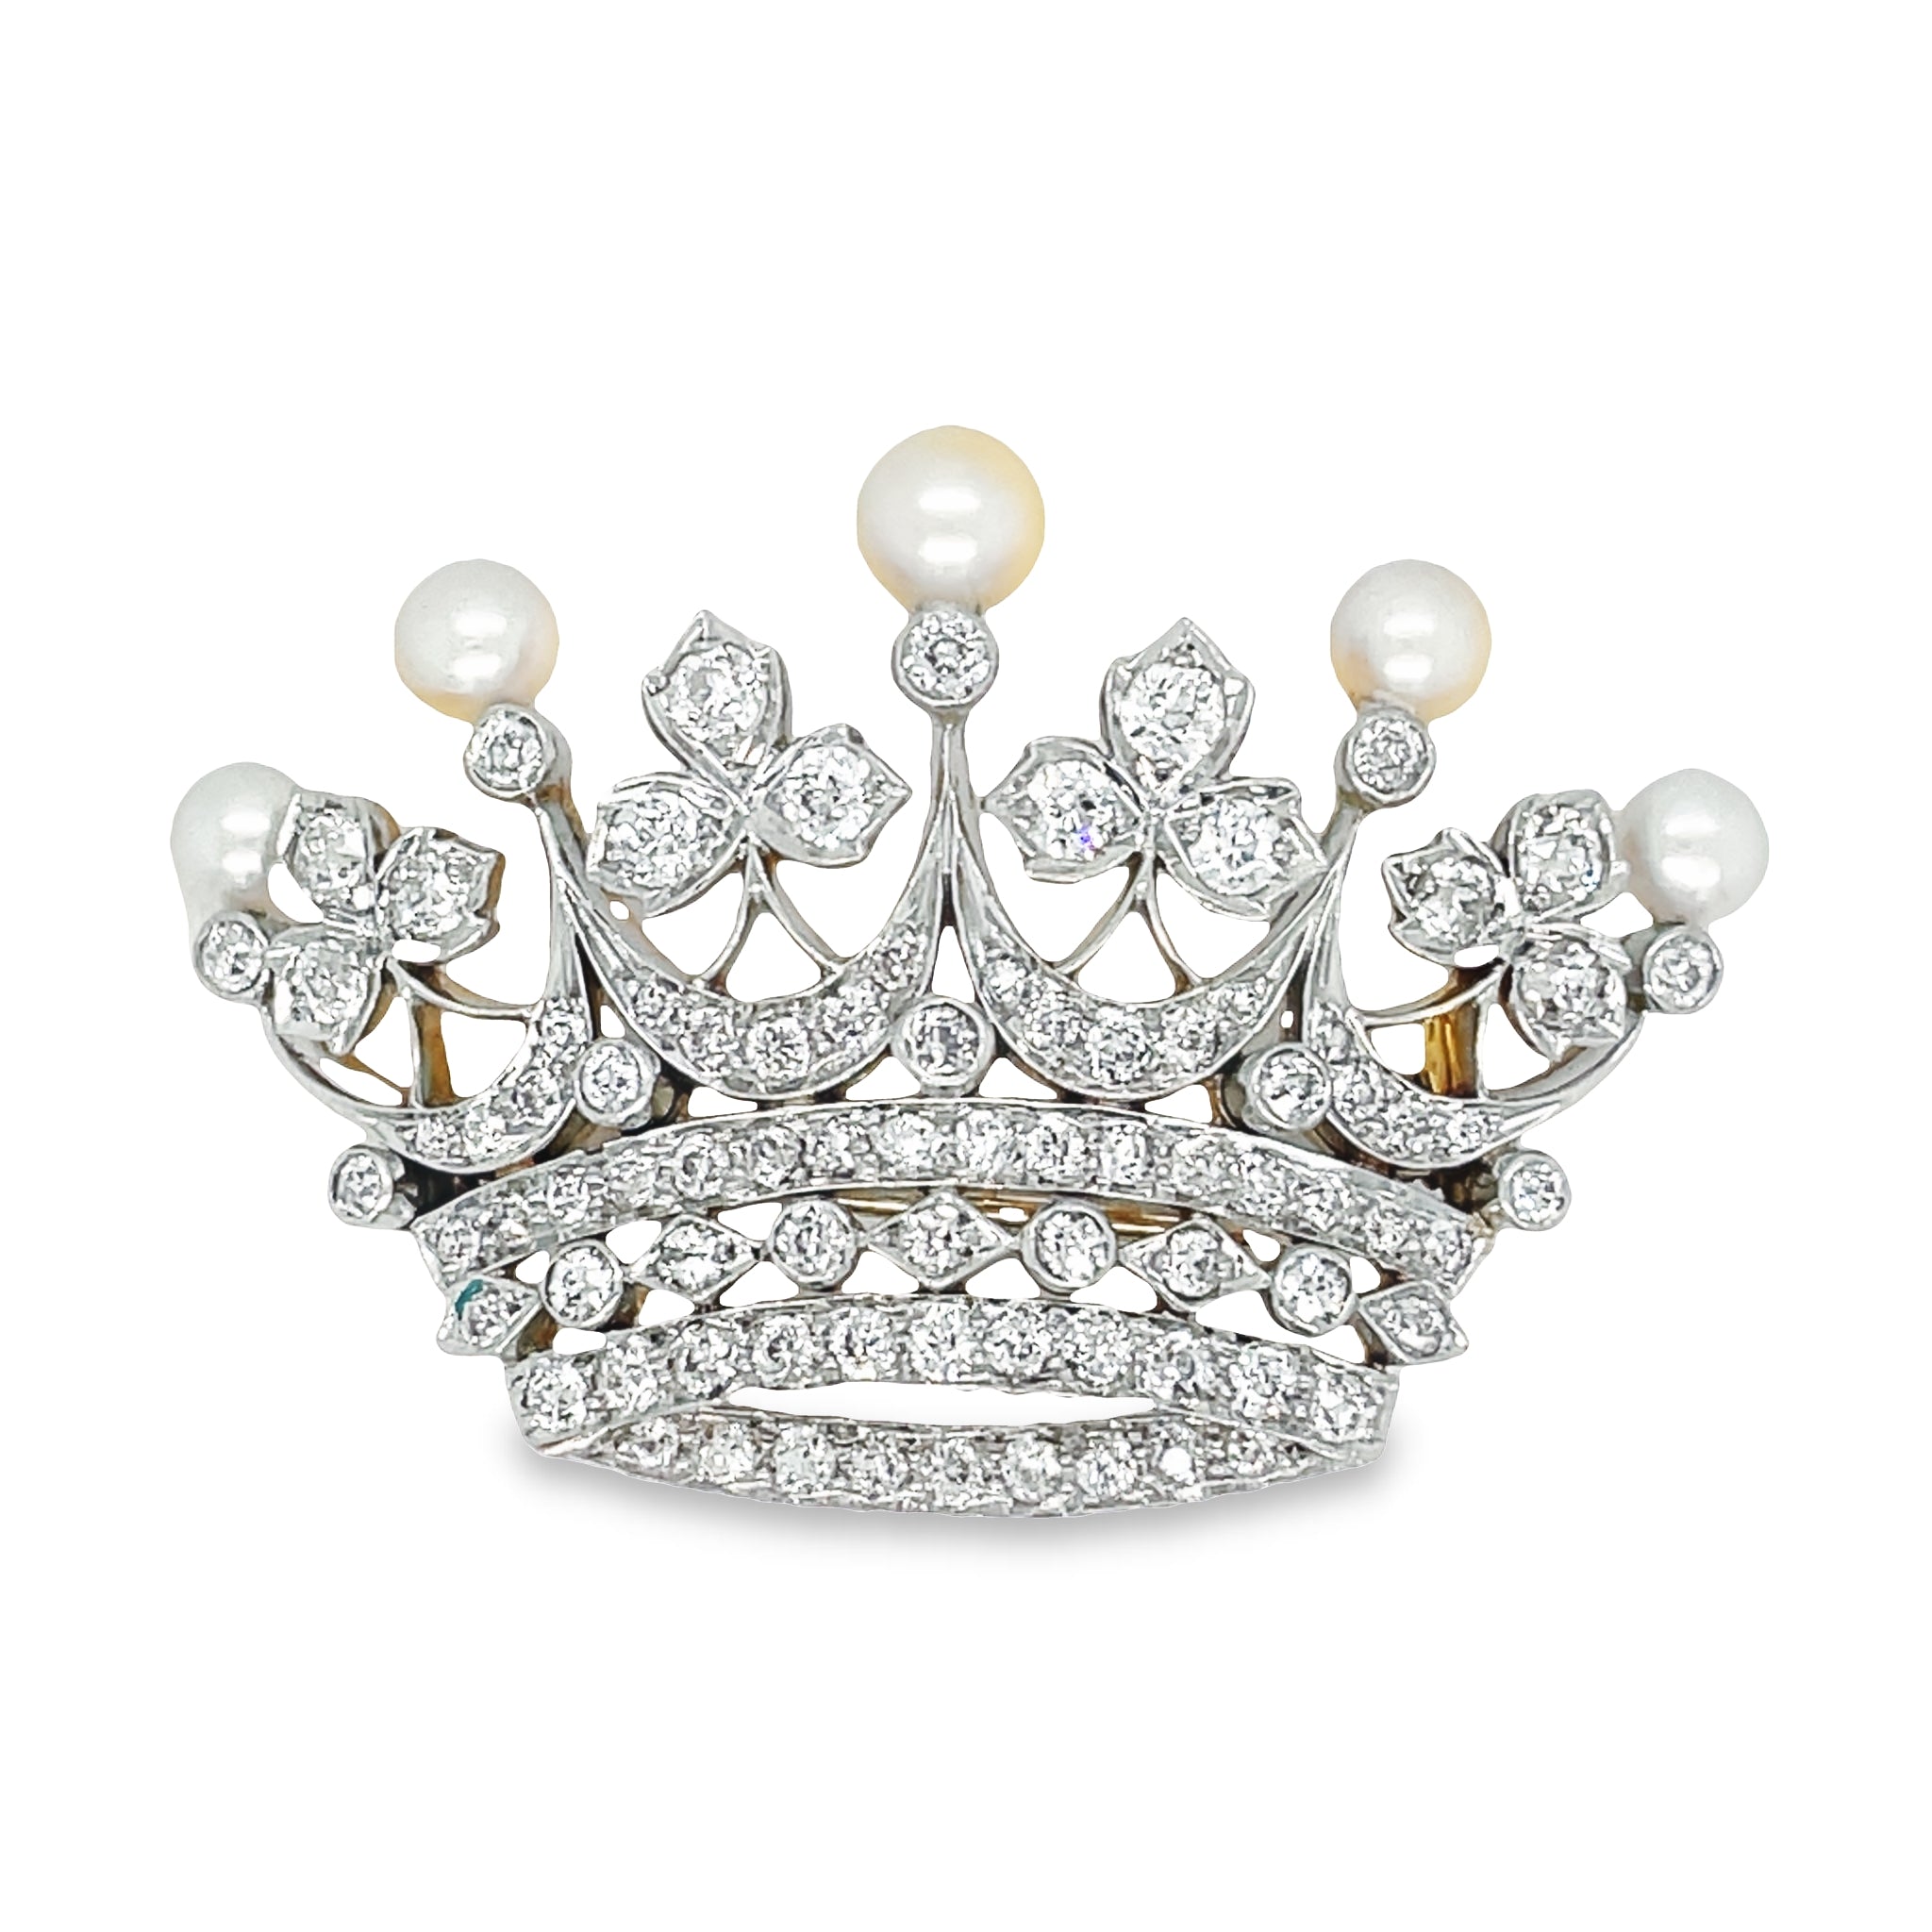 This magnificent Antique Diamond & Pearl Crown Brooch is crafted with exquisite platinum and 18k yellow gold, featuring five graduated cultured pearls and 5.80 cts of round diamonds. Every exquisite detail is sure to take your breath away!